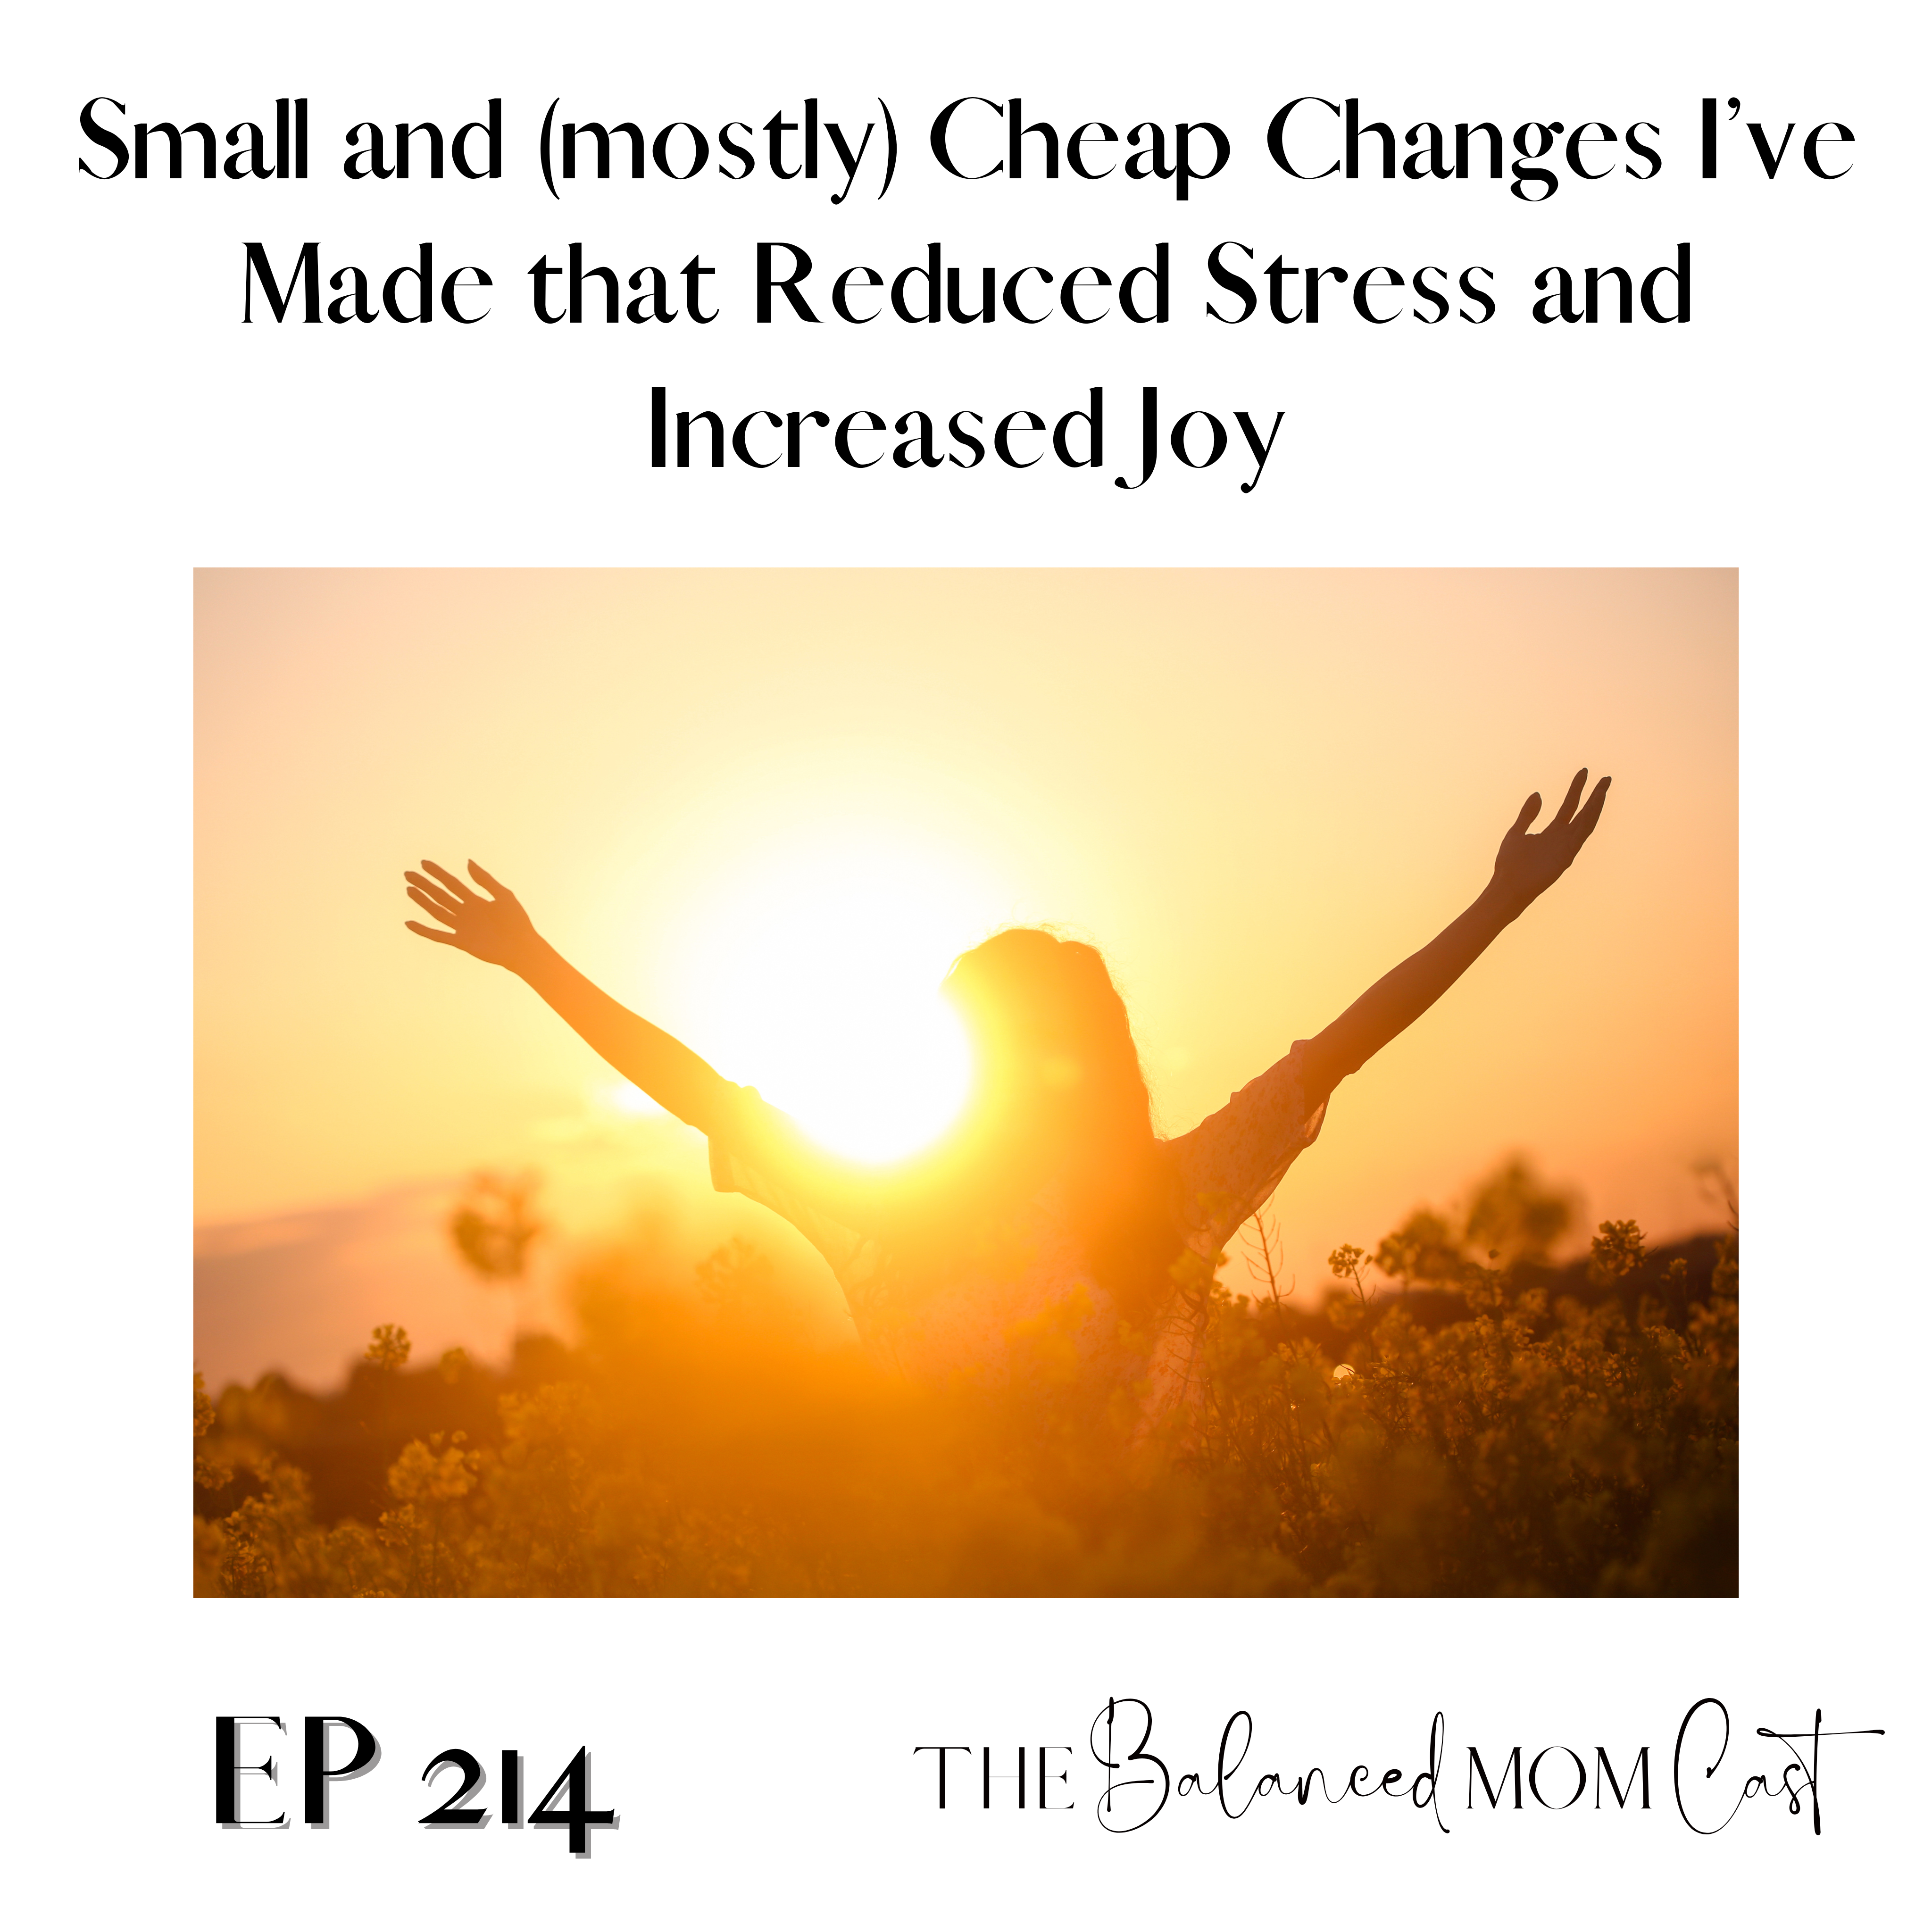 Ep 214: Small and (mostly) Cheap Changes I’ve Made that Reduced Stress and Increased Joy